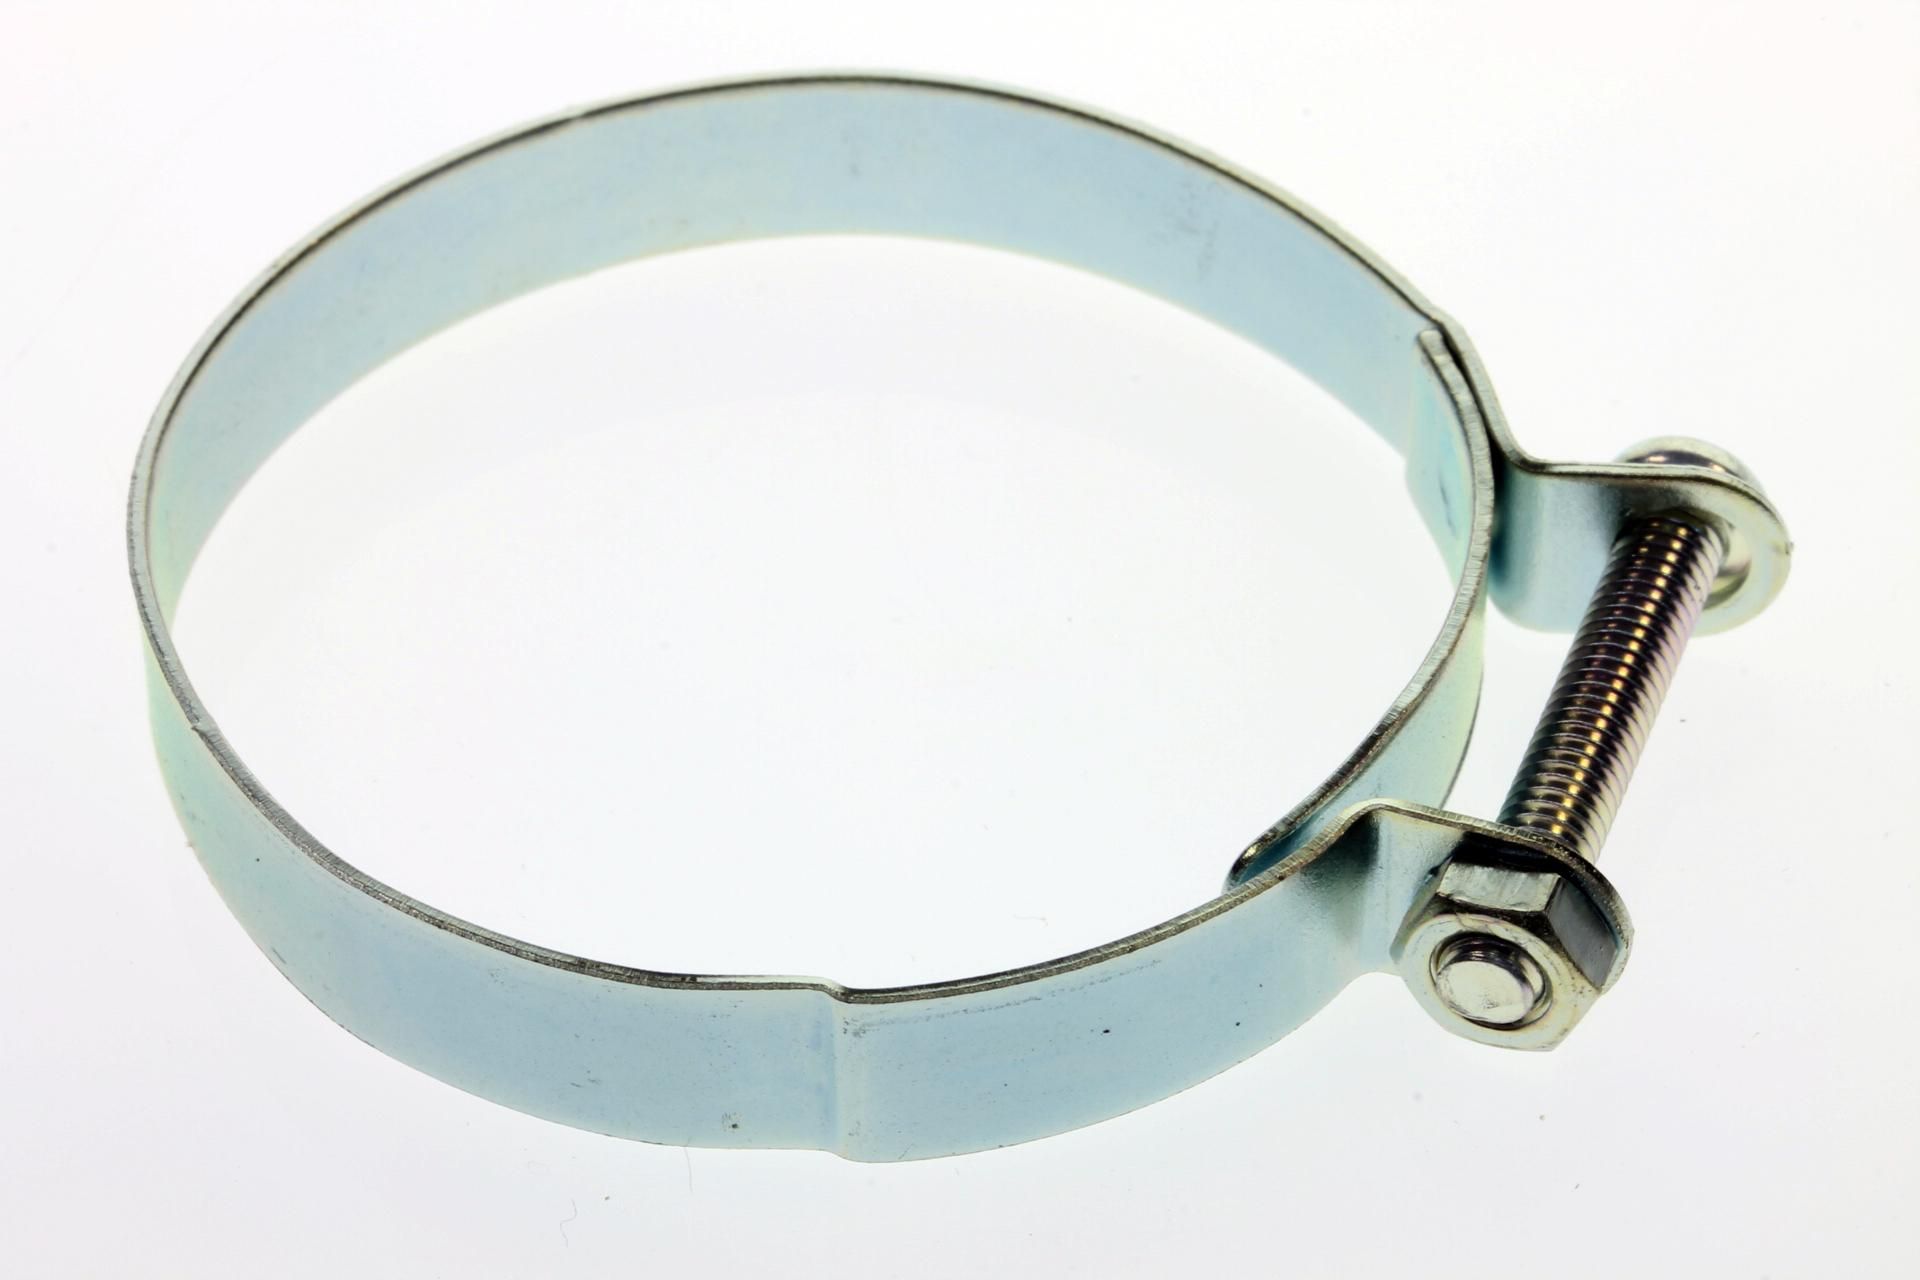 90460-45040-00 Superseded by 90450-45075-00 - HOSE CLAMP ASSY